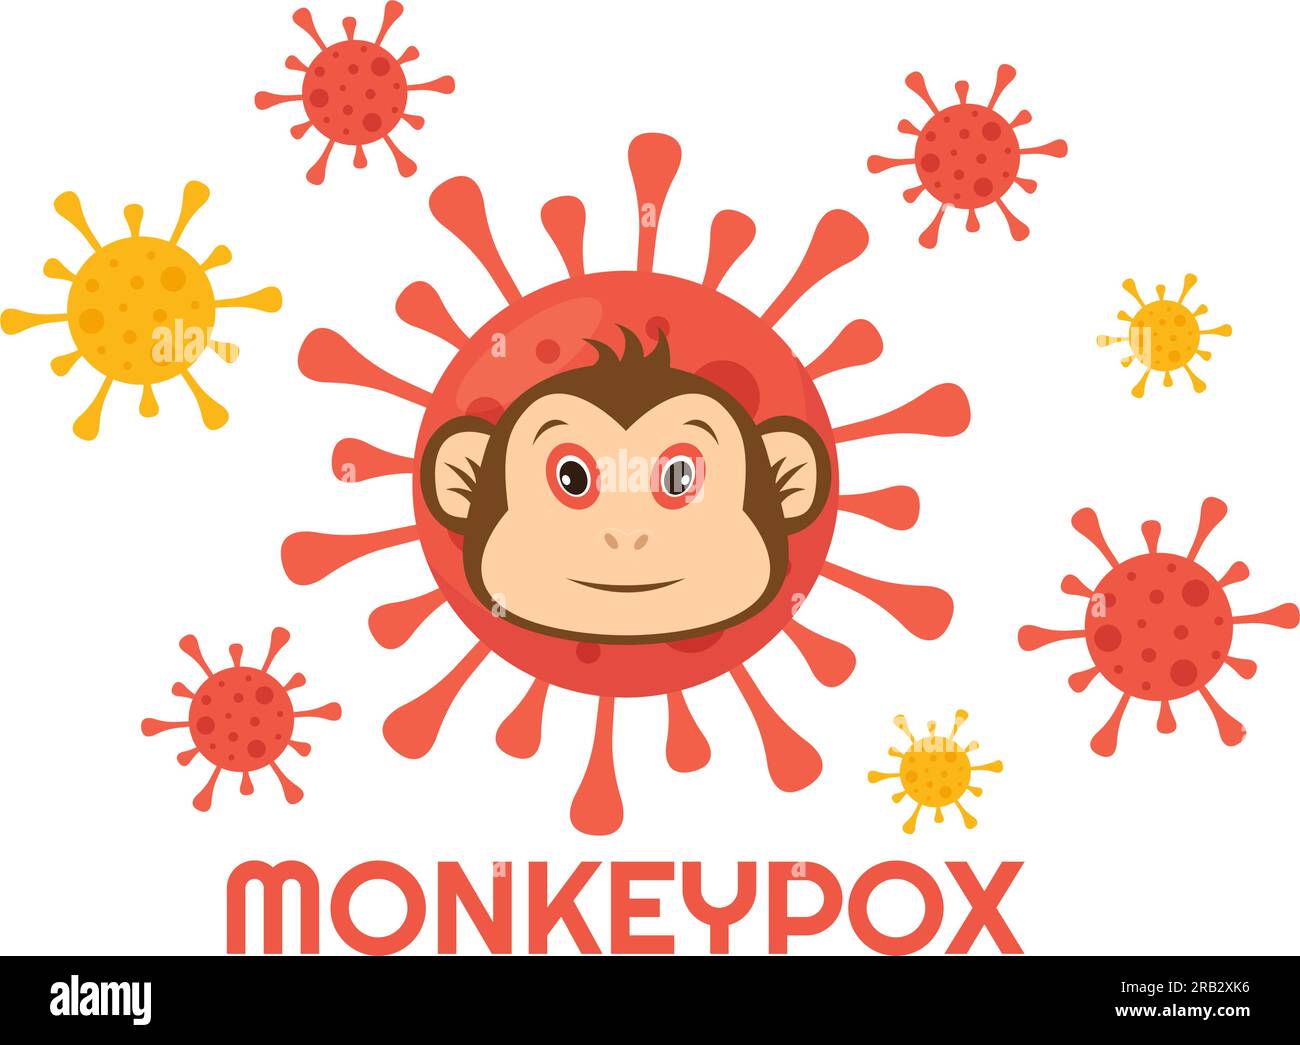 Monkey Pox Outbreak Vector Illustration of Virus Symptoms in Humans Monkeypox Microbiological in Flat Cartoon Hand Drawn Templates Stock Vector